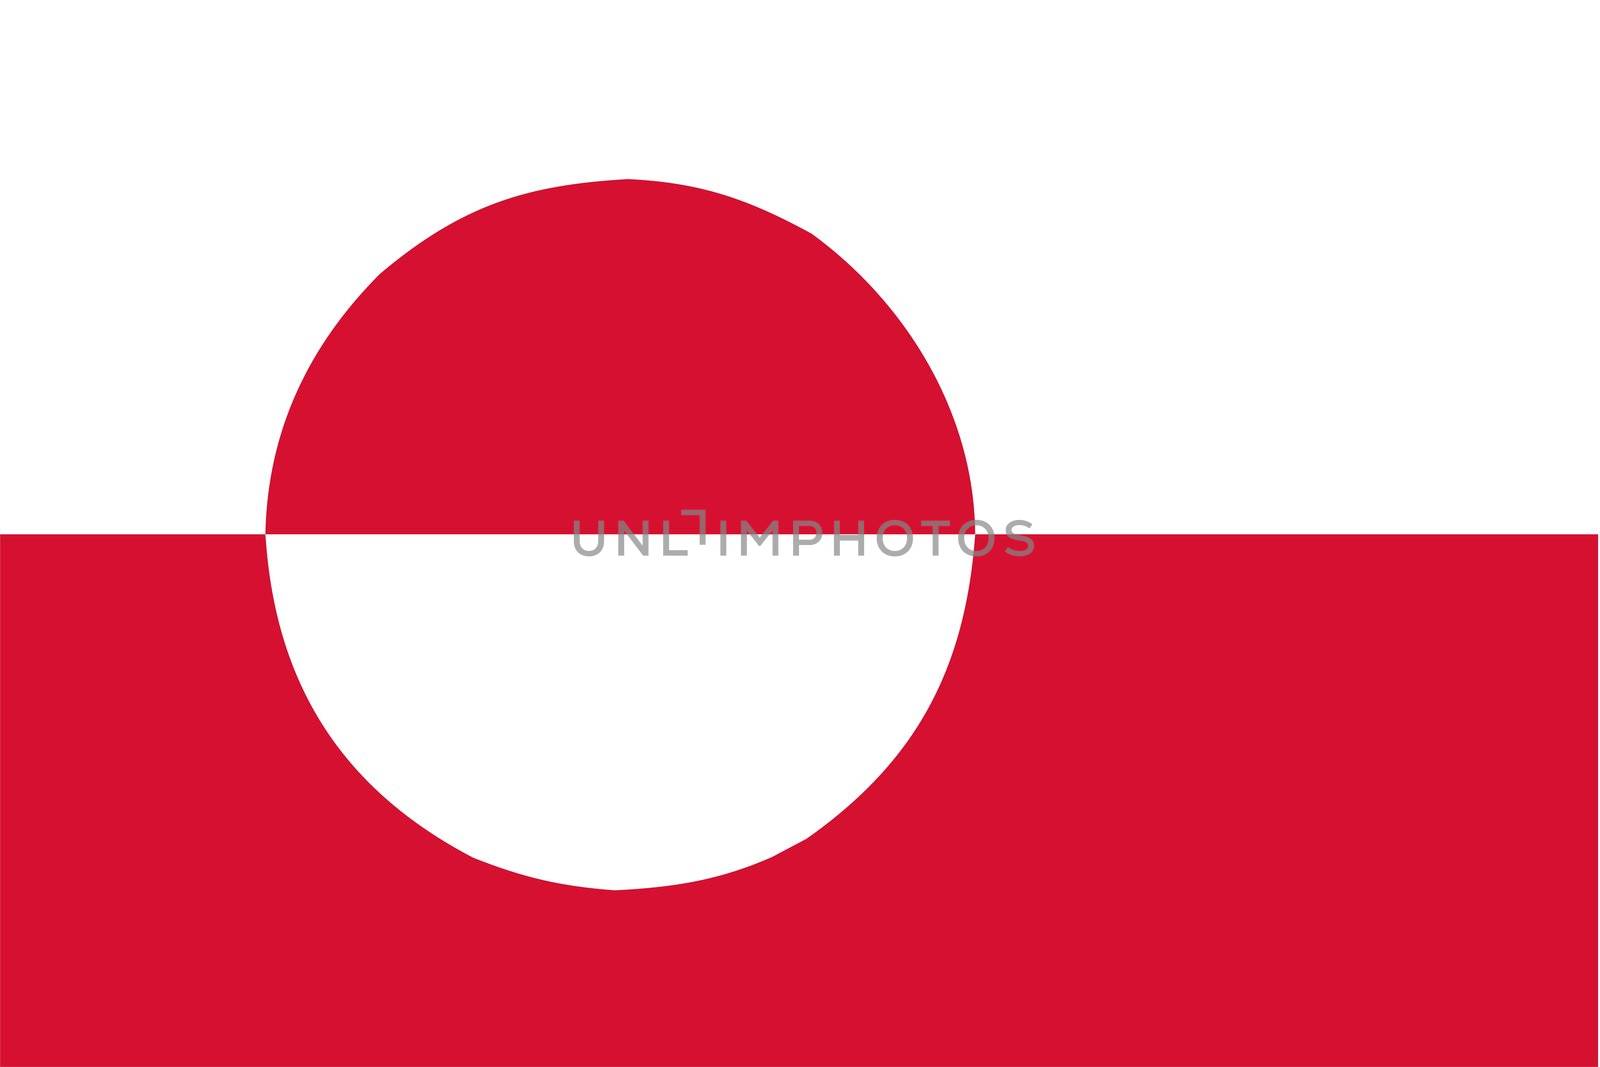 2D illustration of the flag of Greenland vector